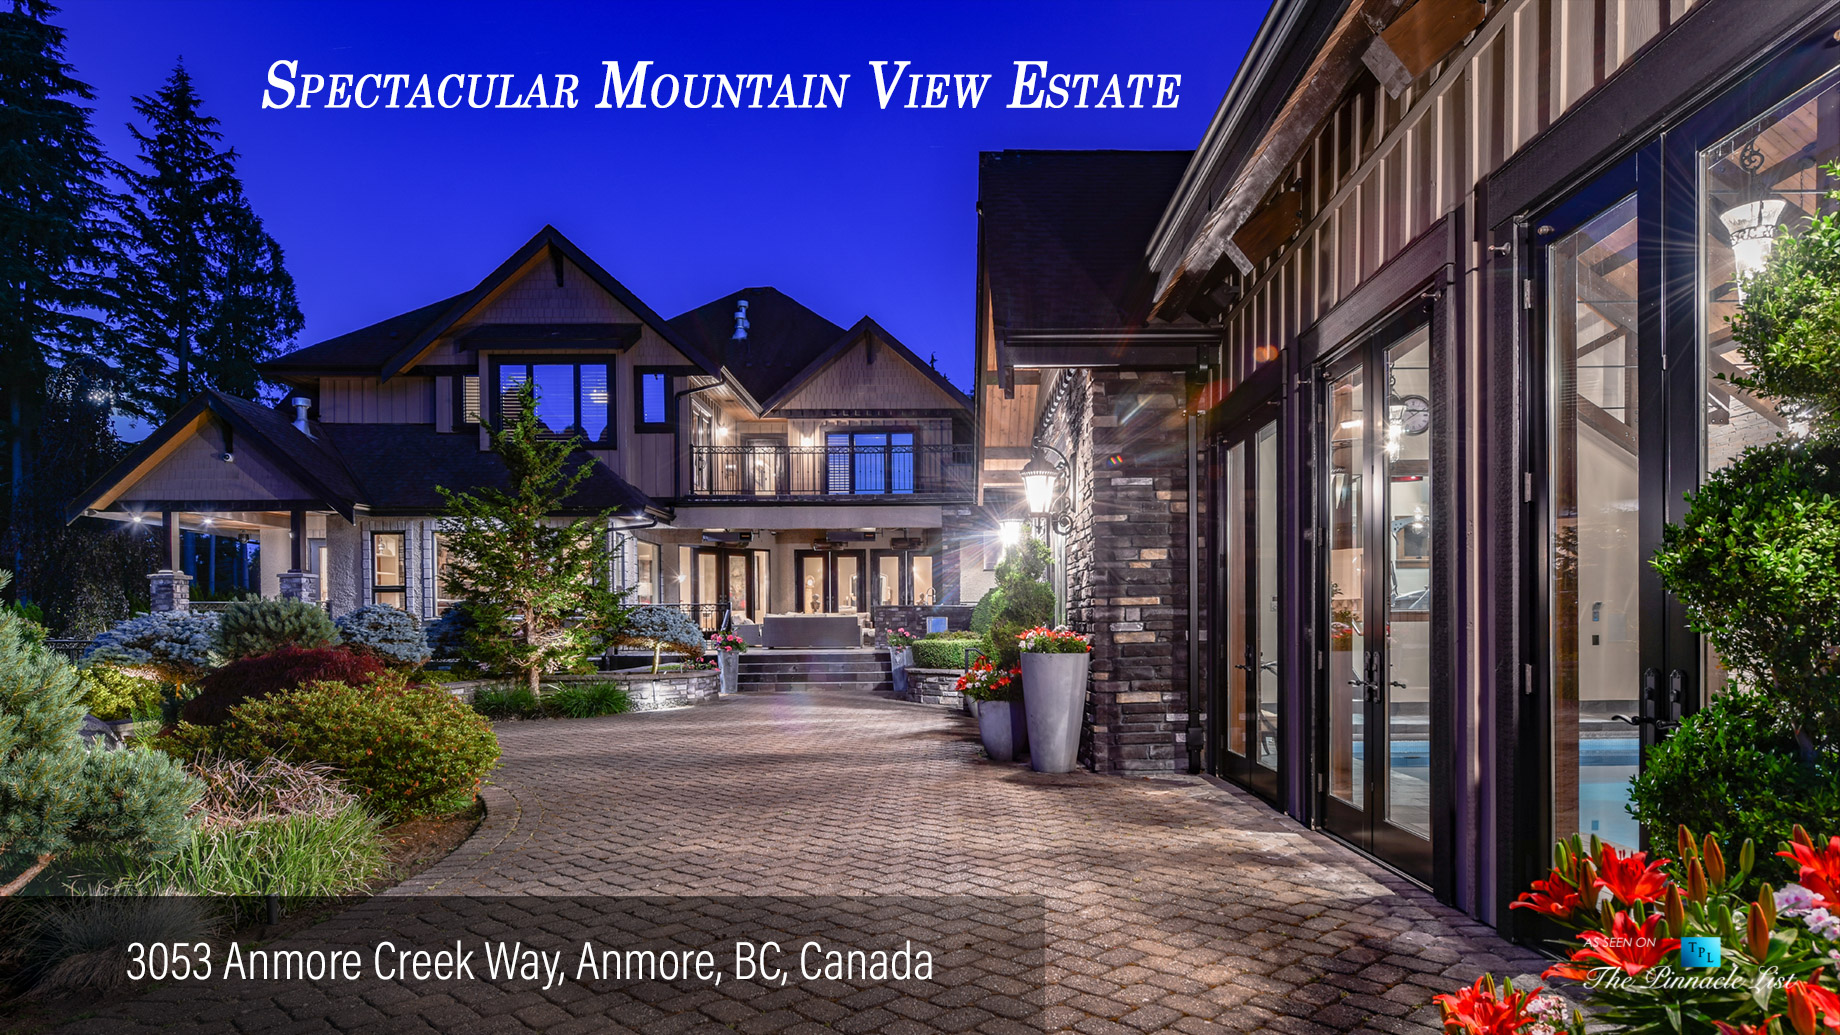 Spectacular Mountain View Estate - 3053 Anmore Creek Way, Anmore, BC, Canada